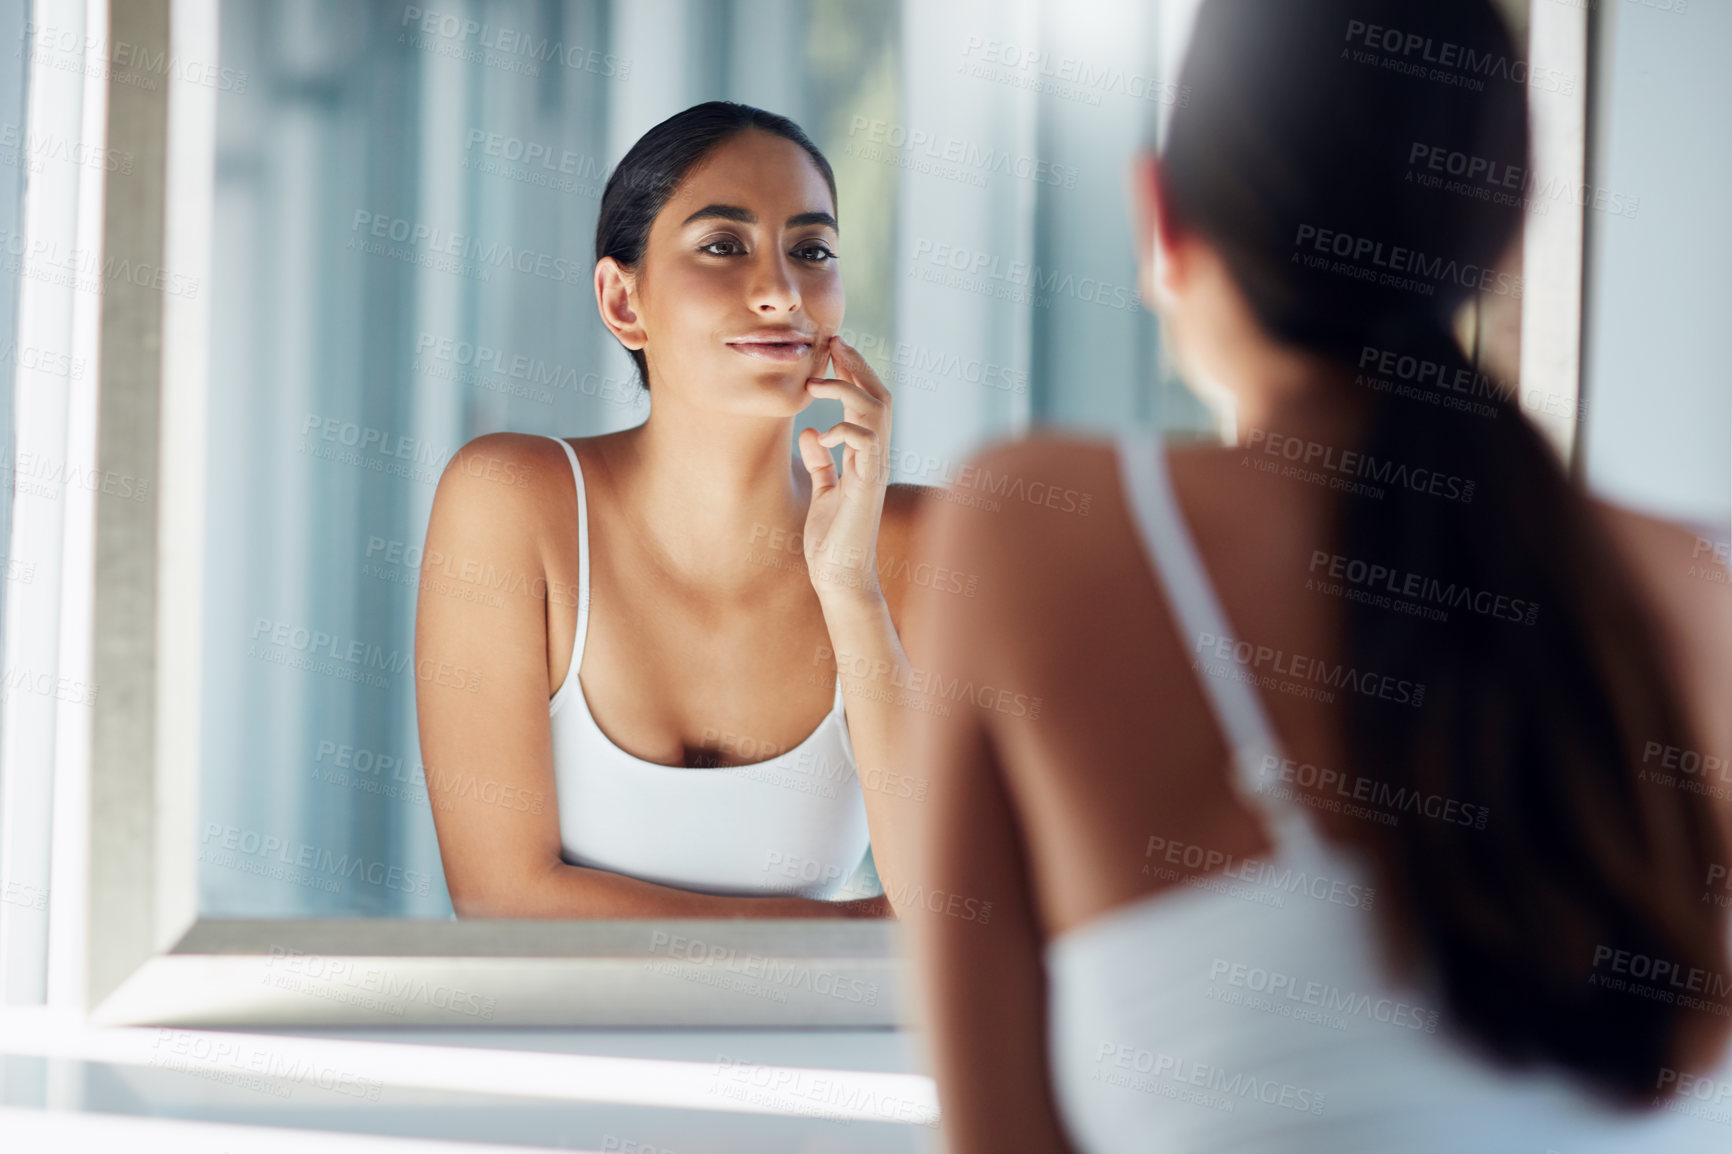 Buy stock photo Cropped shot of an attractive young woman inspecting her skin in front of the bathroom mirror